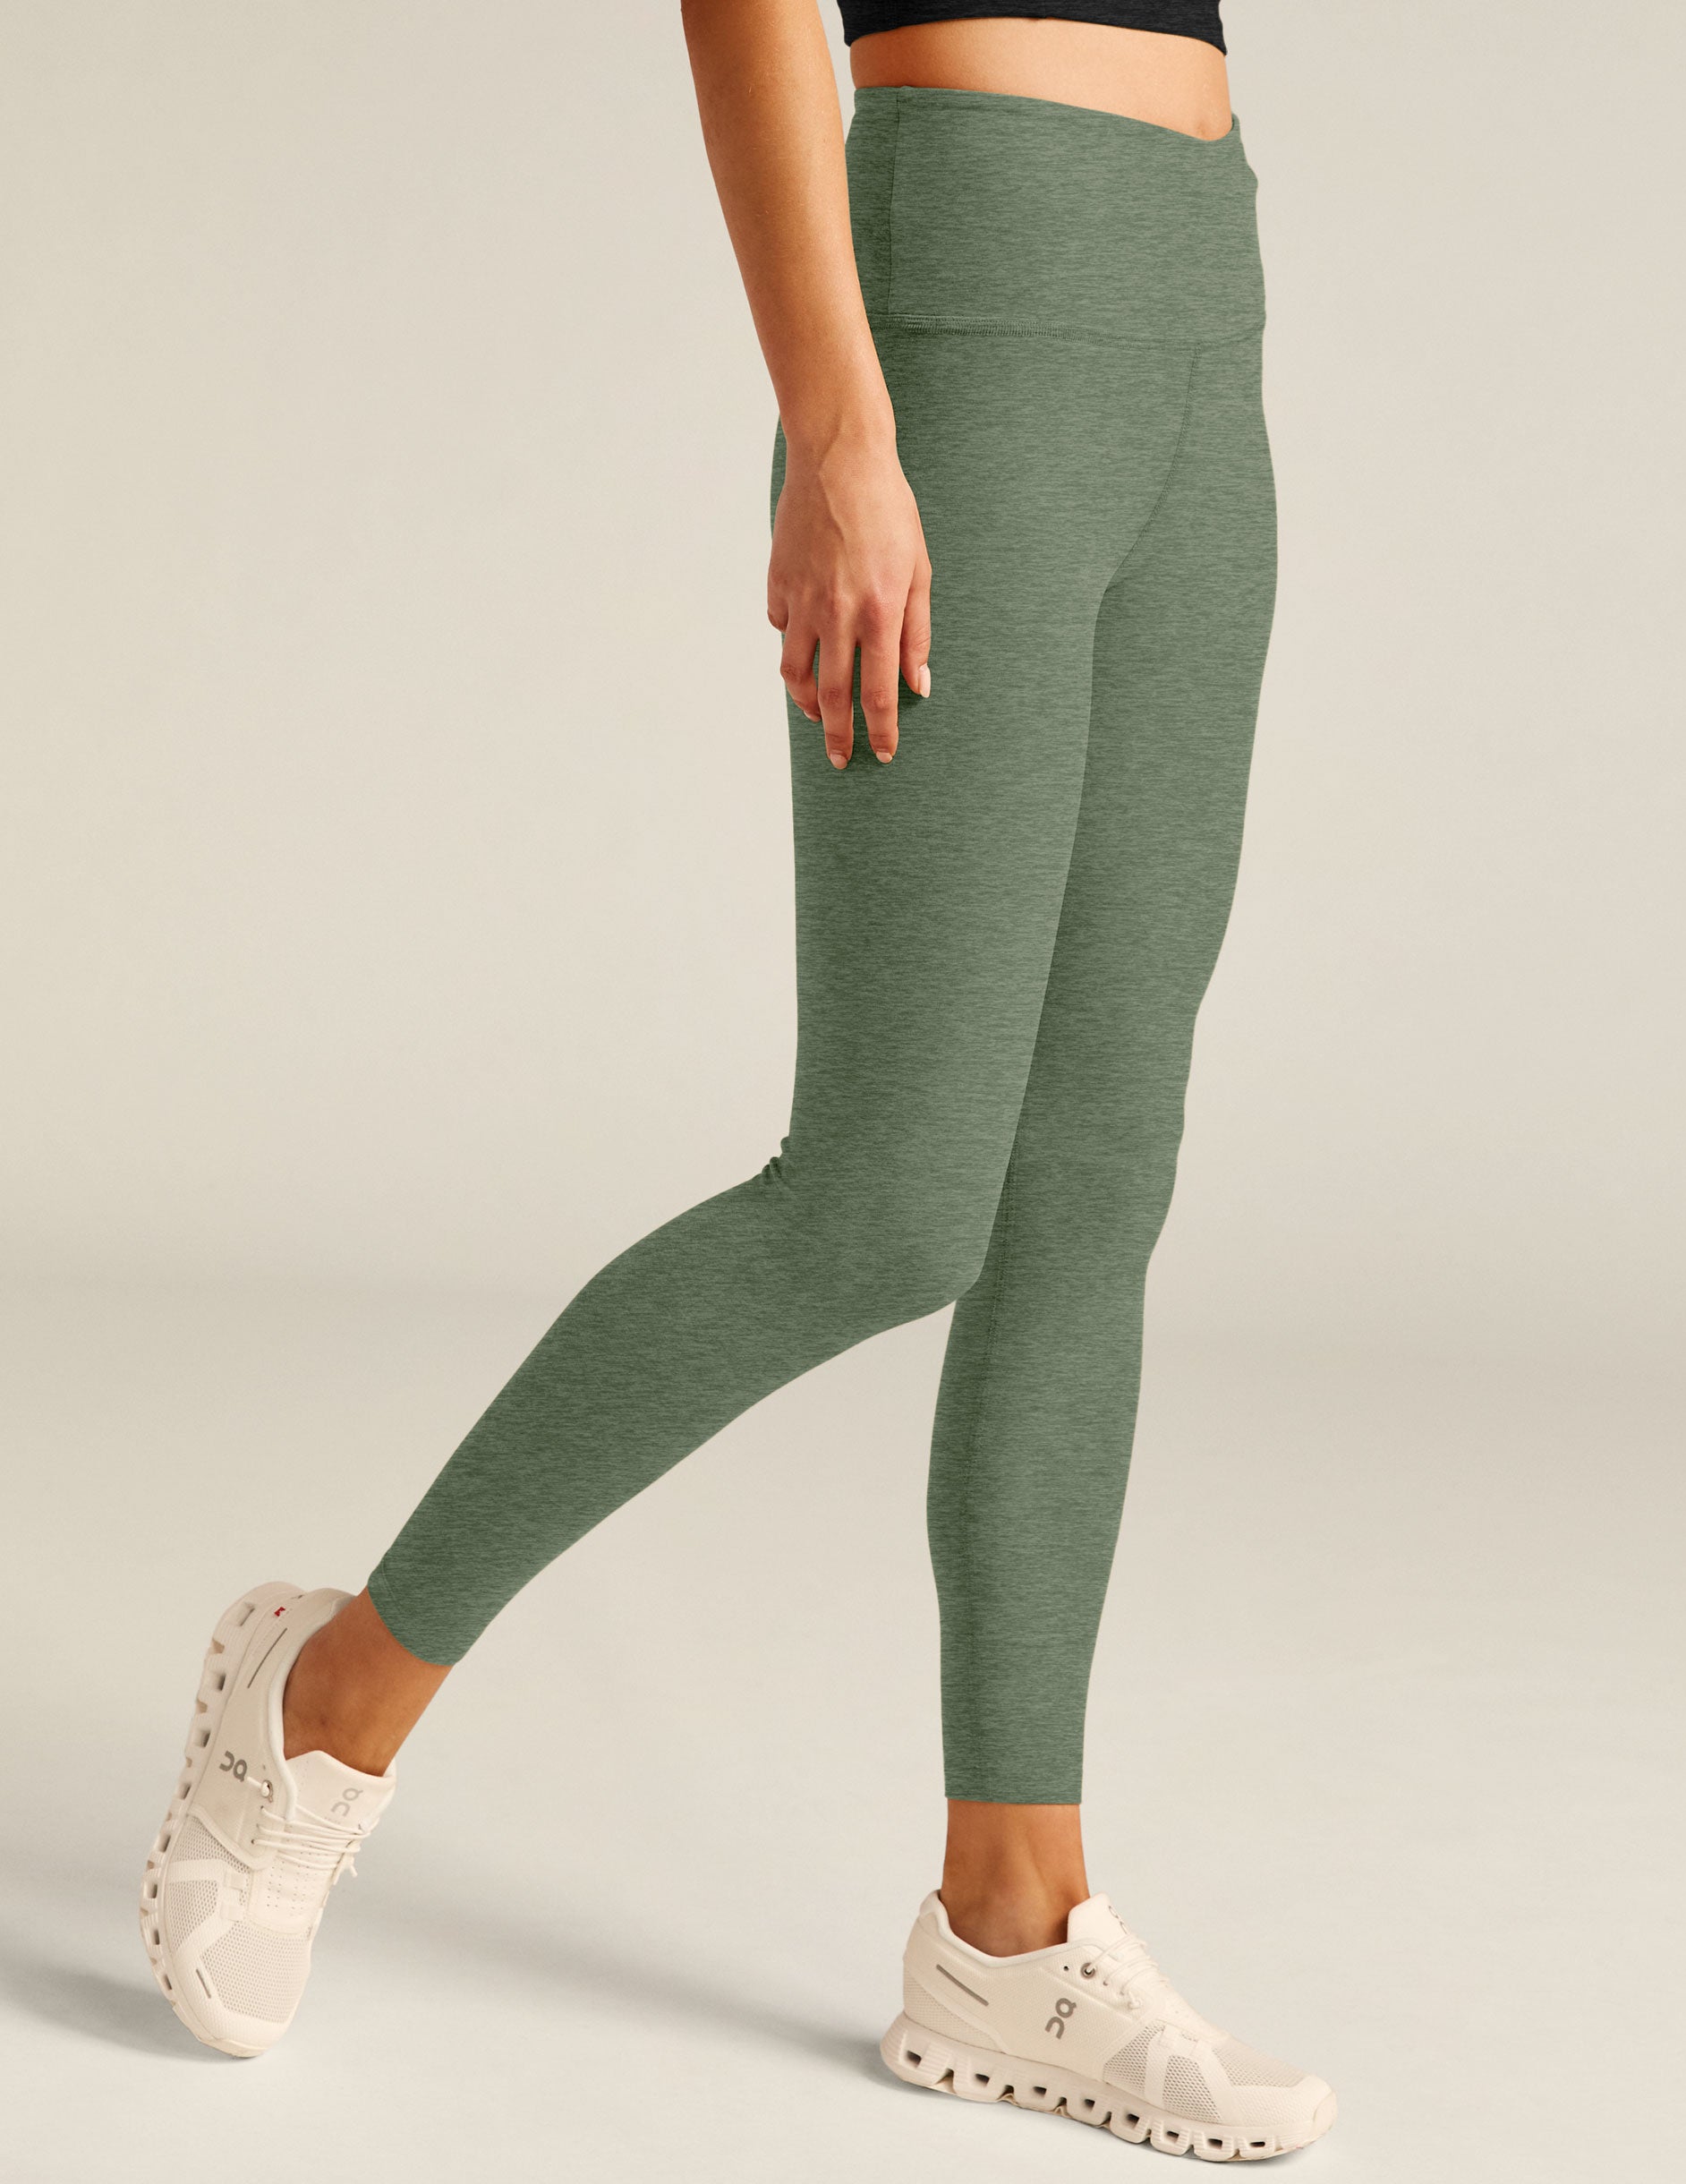 green high-waisted midi leggings with a crossover detail on the front waistband. 